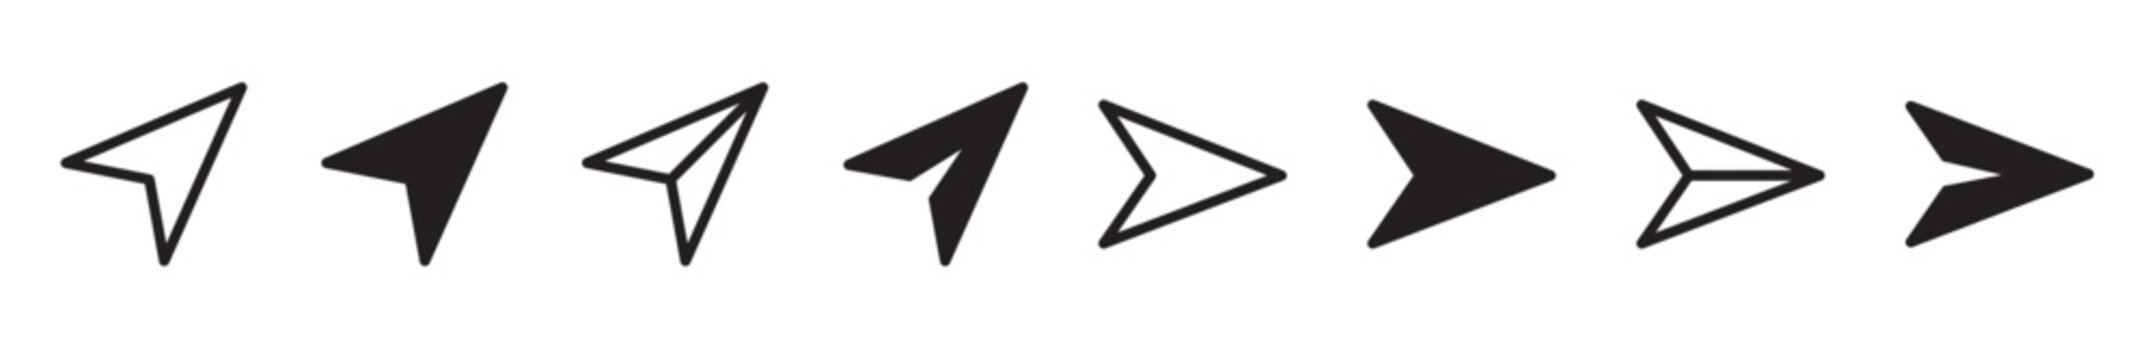 Message send icon set. Direct message or dm vector symbol. Send post or mail or email arrow icon. Black paper plane line button set.